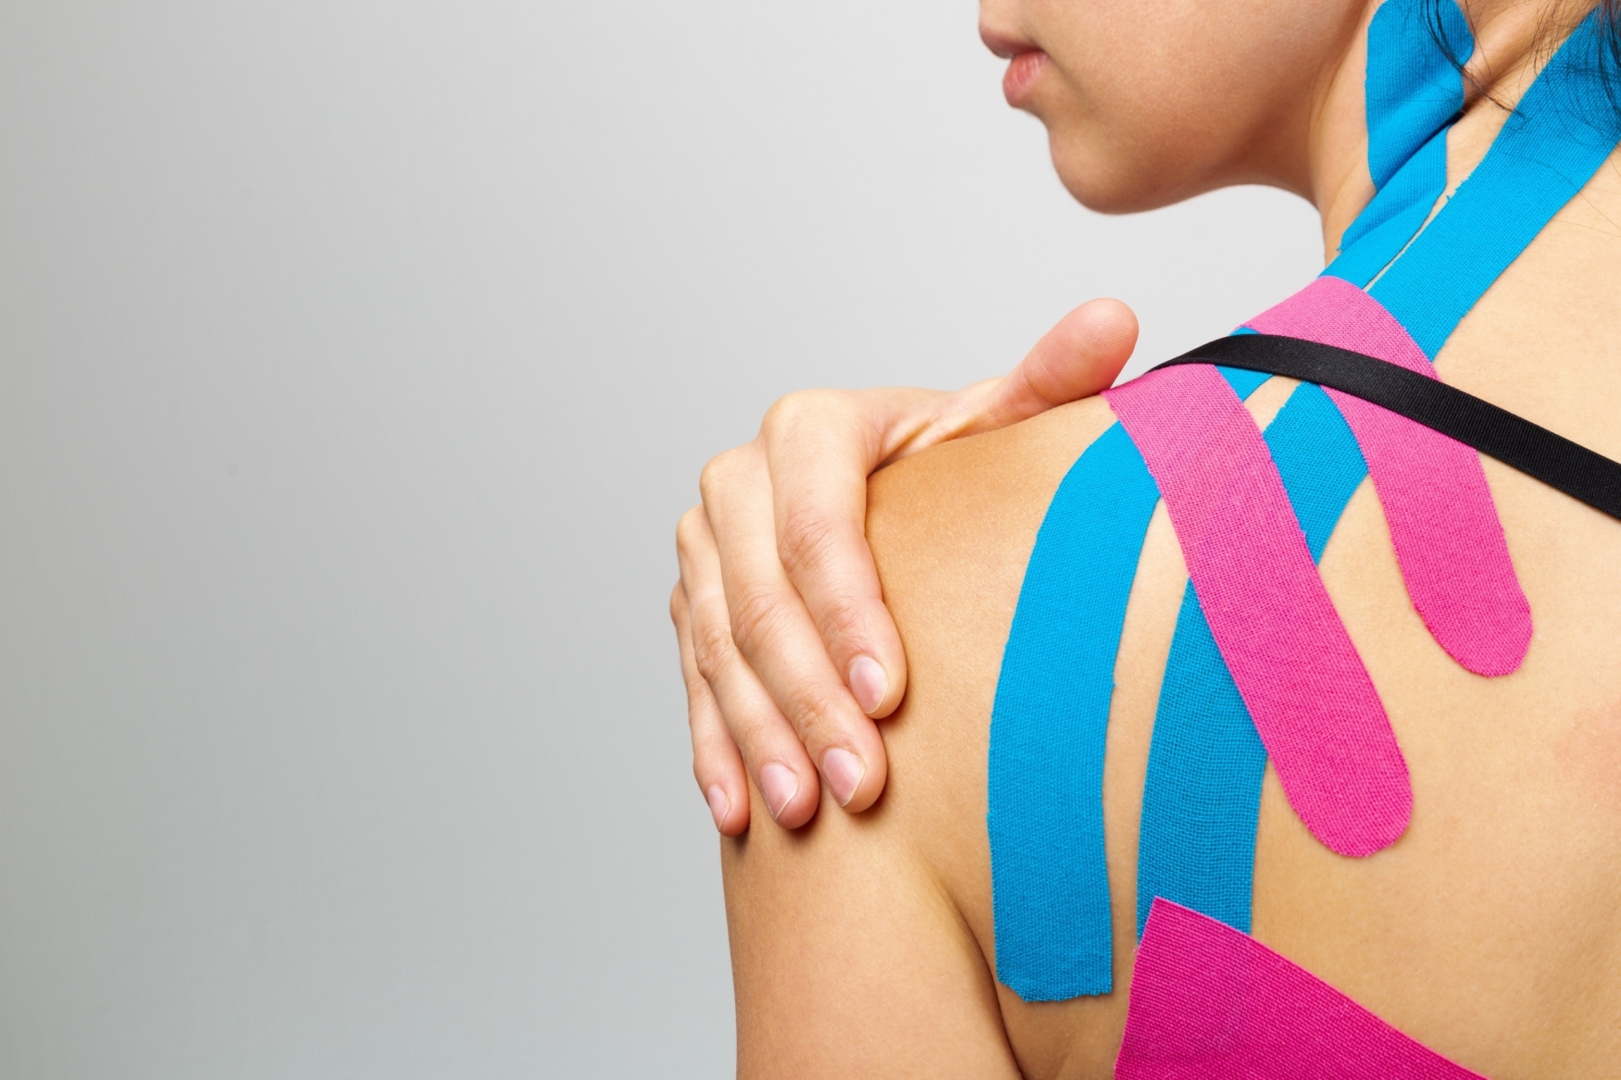 7 Conditions that will benefit with the use of Kinesio Tape